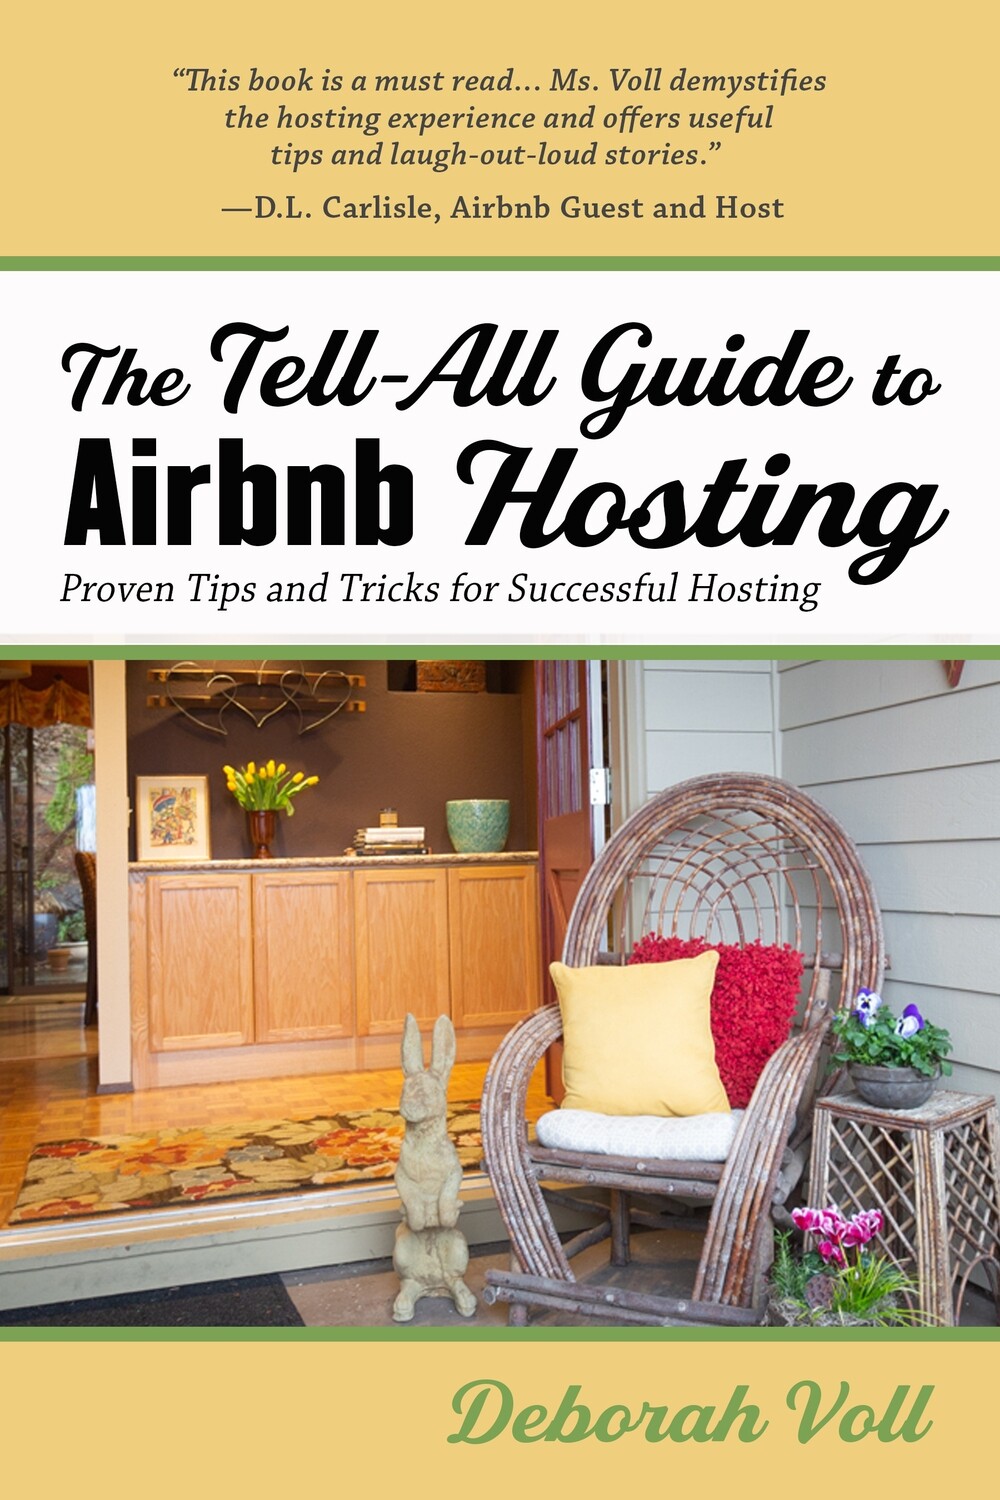 The Tell-All Guide to Airbnb Hosting by Deborah Voll